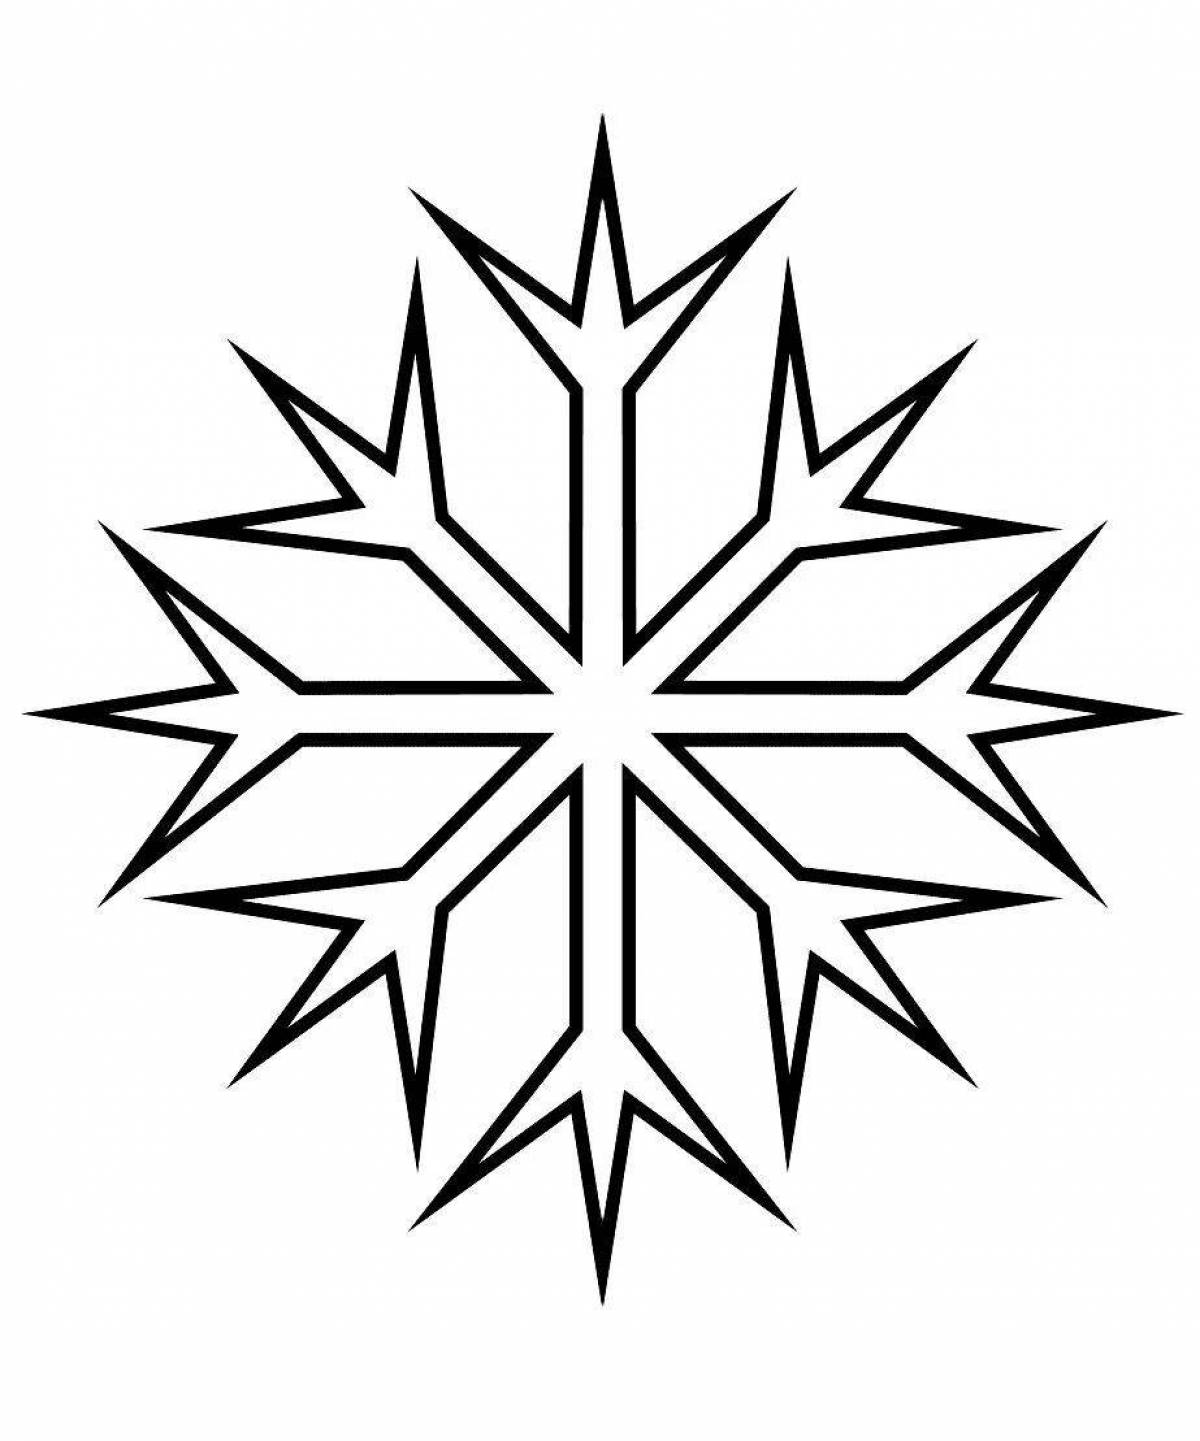 Delightful page for drawing snowflakes